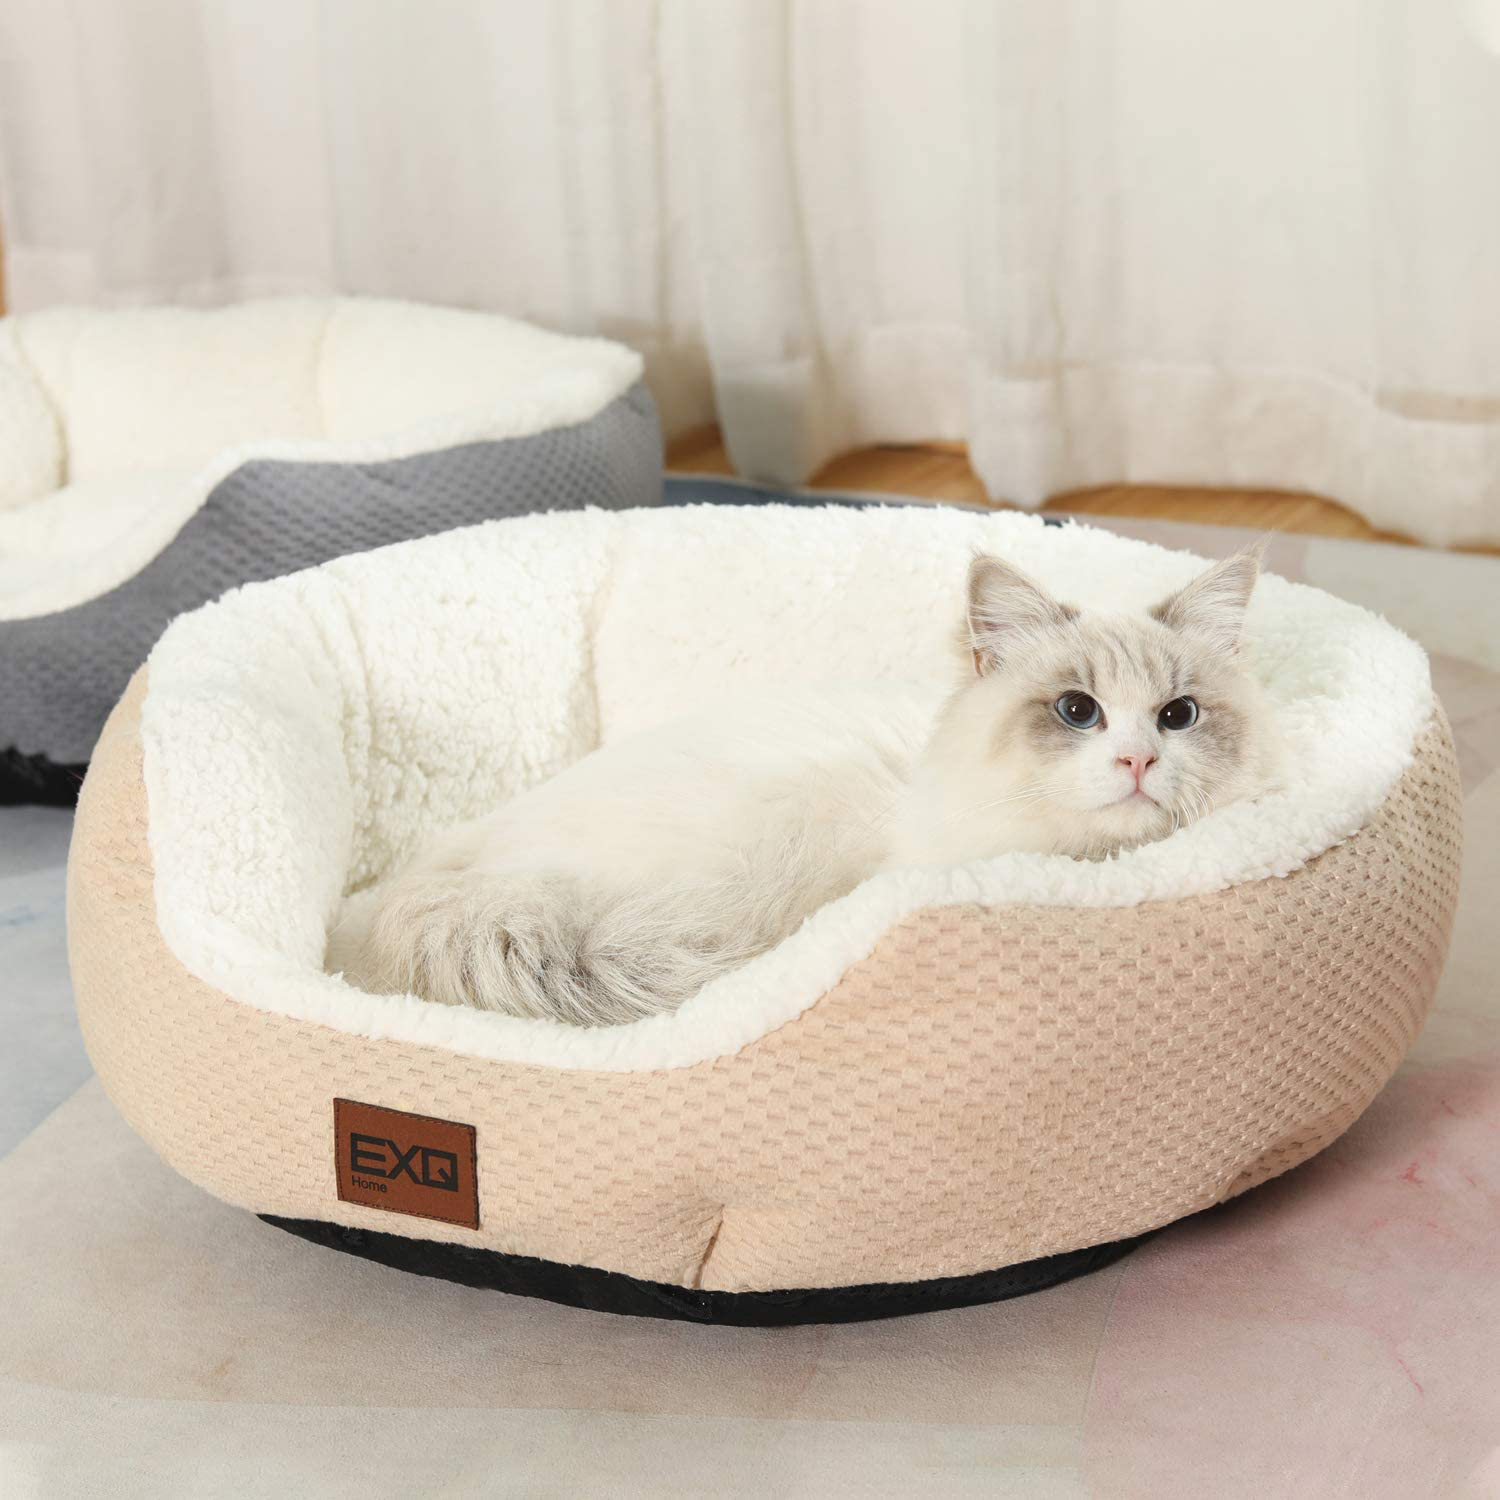 EXQ Home Soft Cat Beds for Indoor Cats,Fluffy Calming Cat Bed with Slip-Resistant Bottom,Plush round Dog Beds for Small Dogs,Kitten Bed Machine Washable Pet Beds for Small Dogs Animals & Pet Supplies > Pet Supplies > Cat Supplies > Cat Beds EXQUSA20CB02GRST Camel-1 20in 